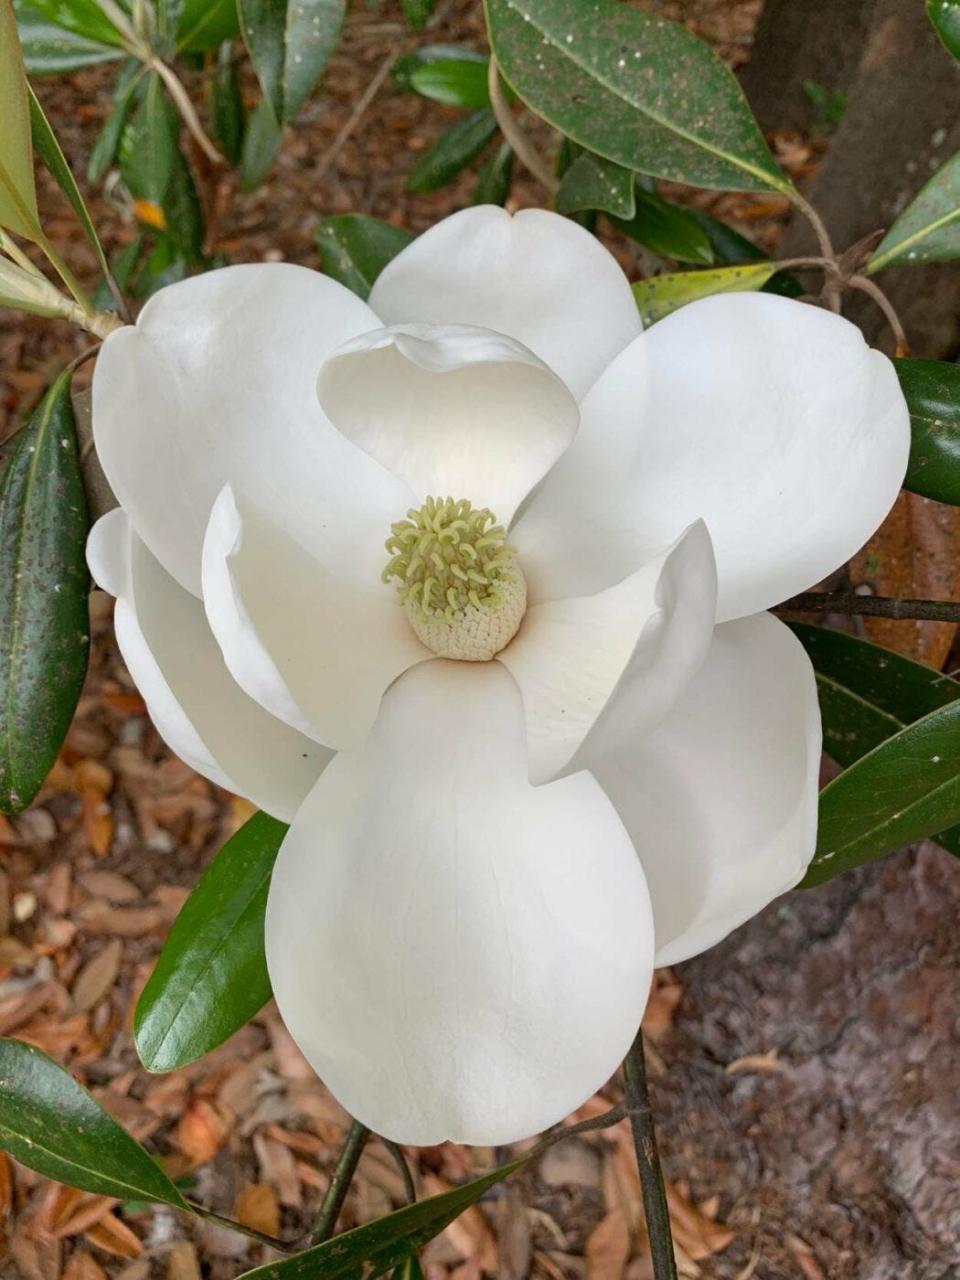 The Southern Magnolia is blooming at Airlie Gardens.